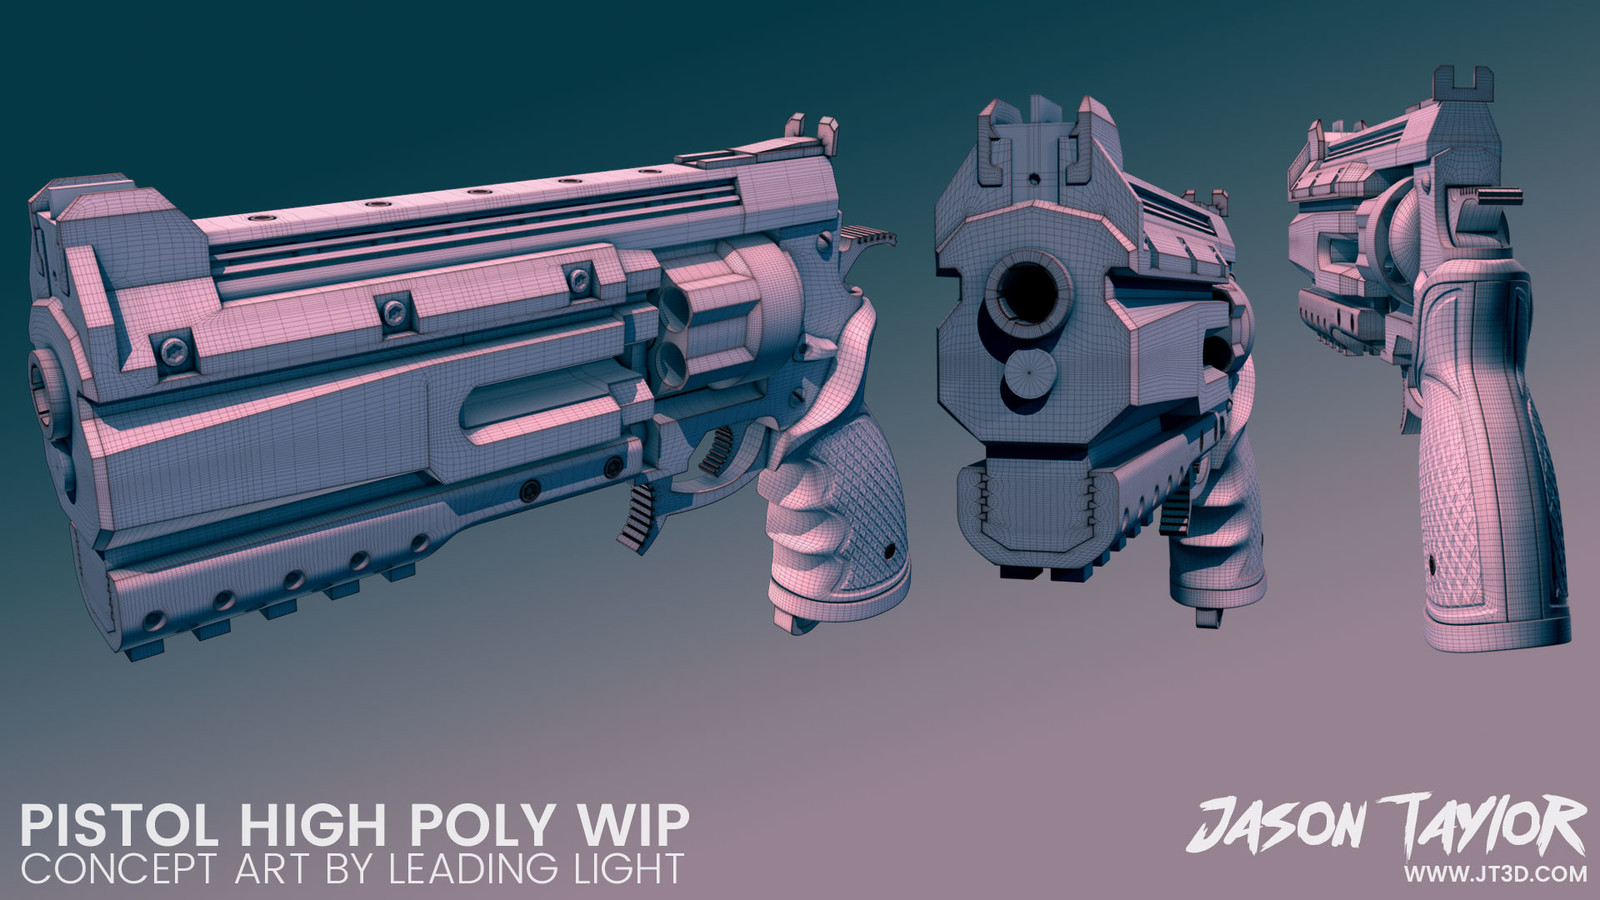 High poly work in progress.  Concept art by Leading Light.